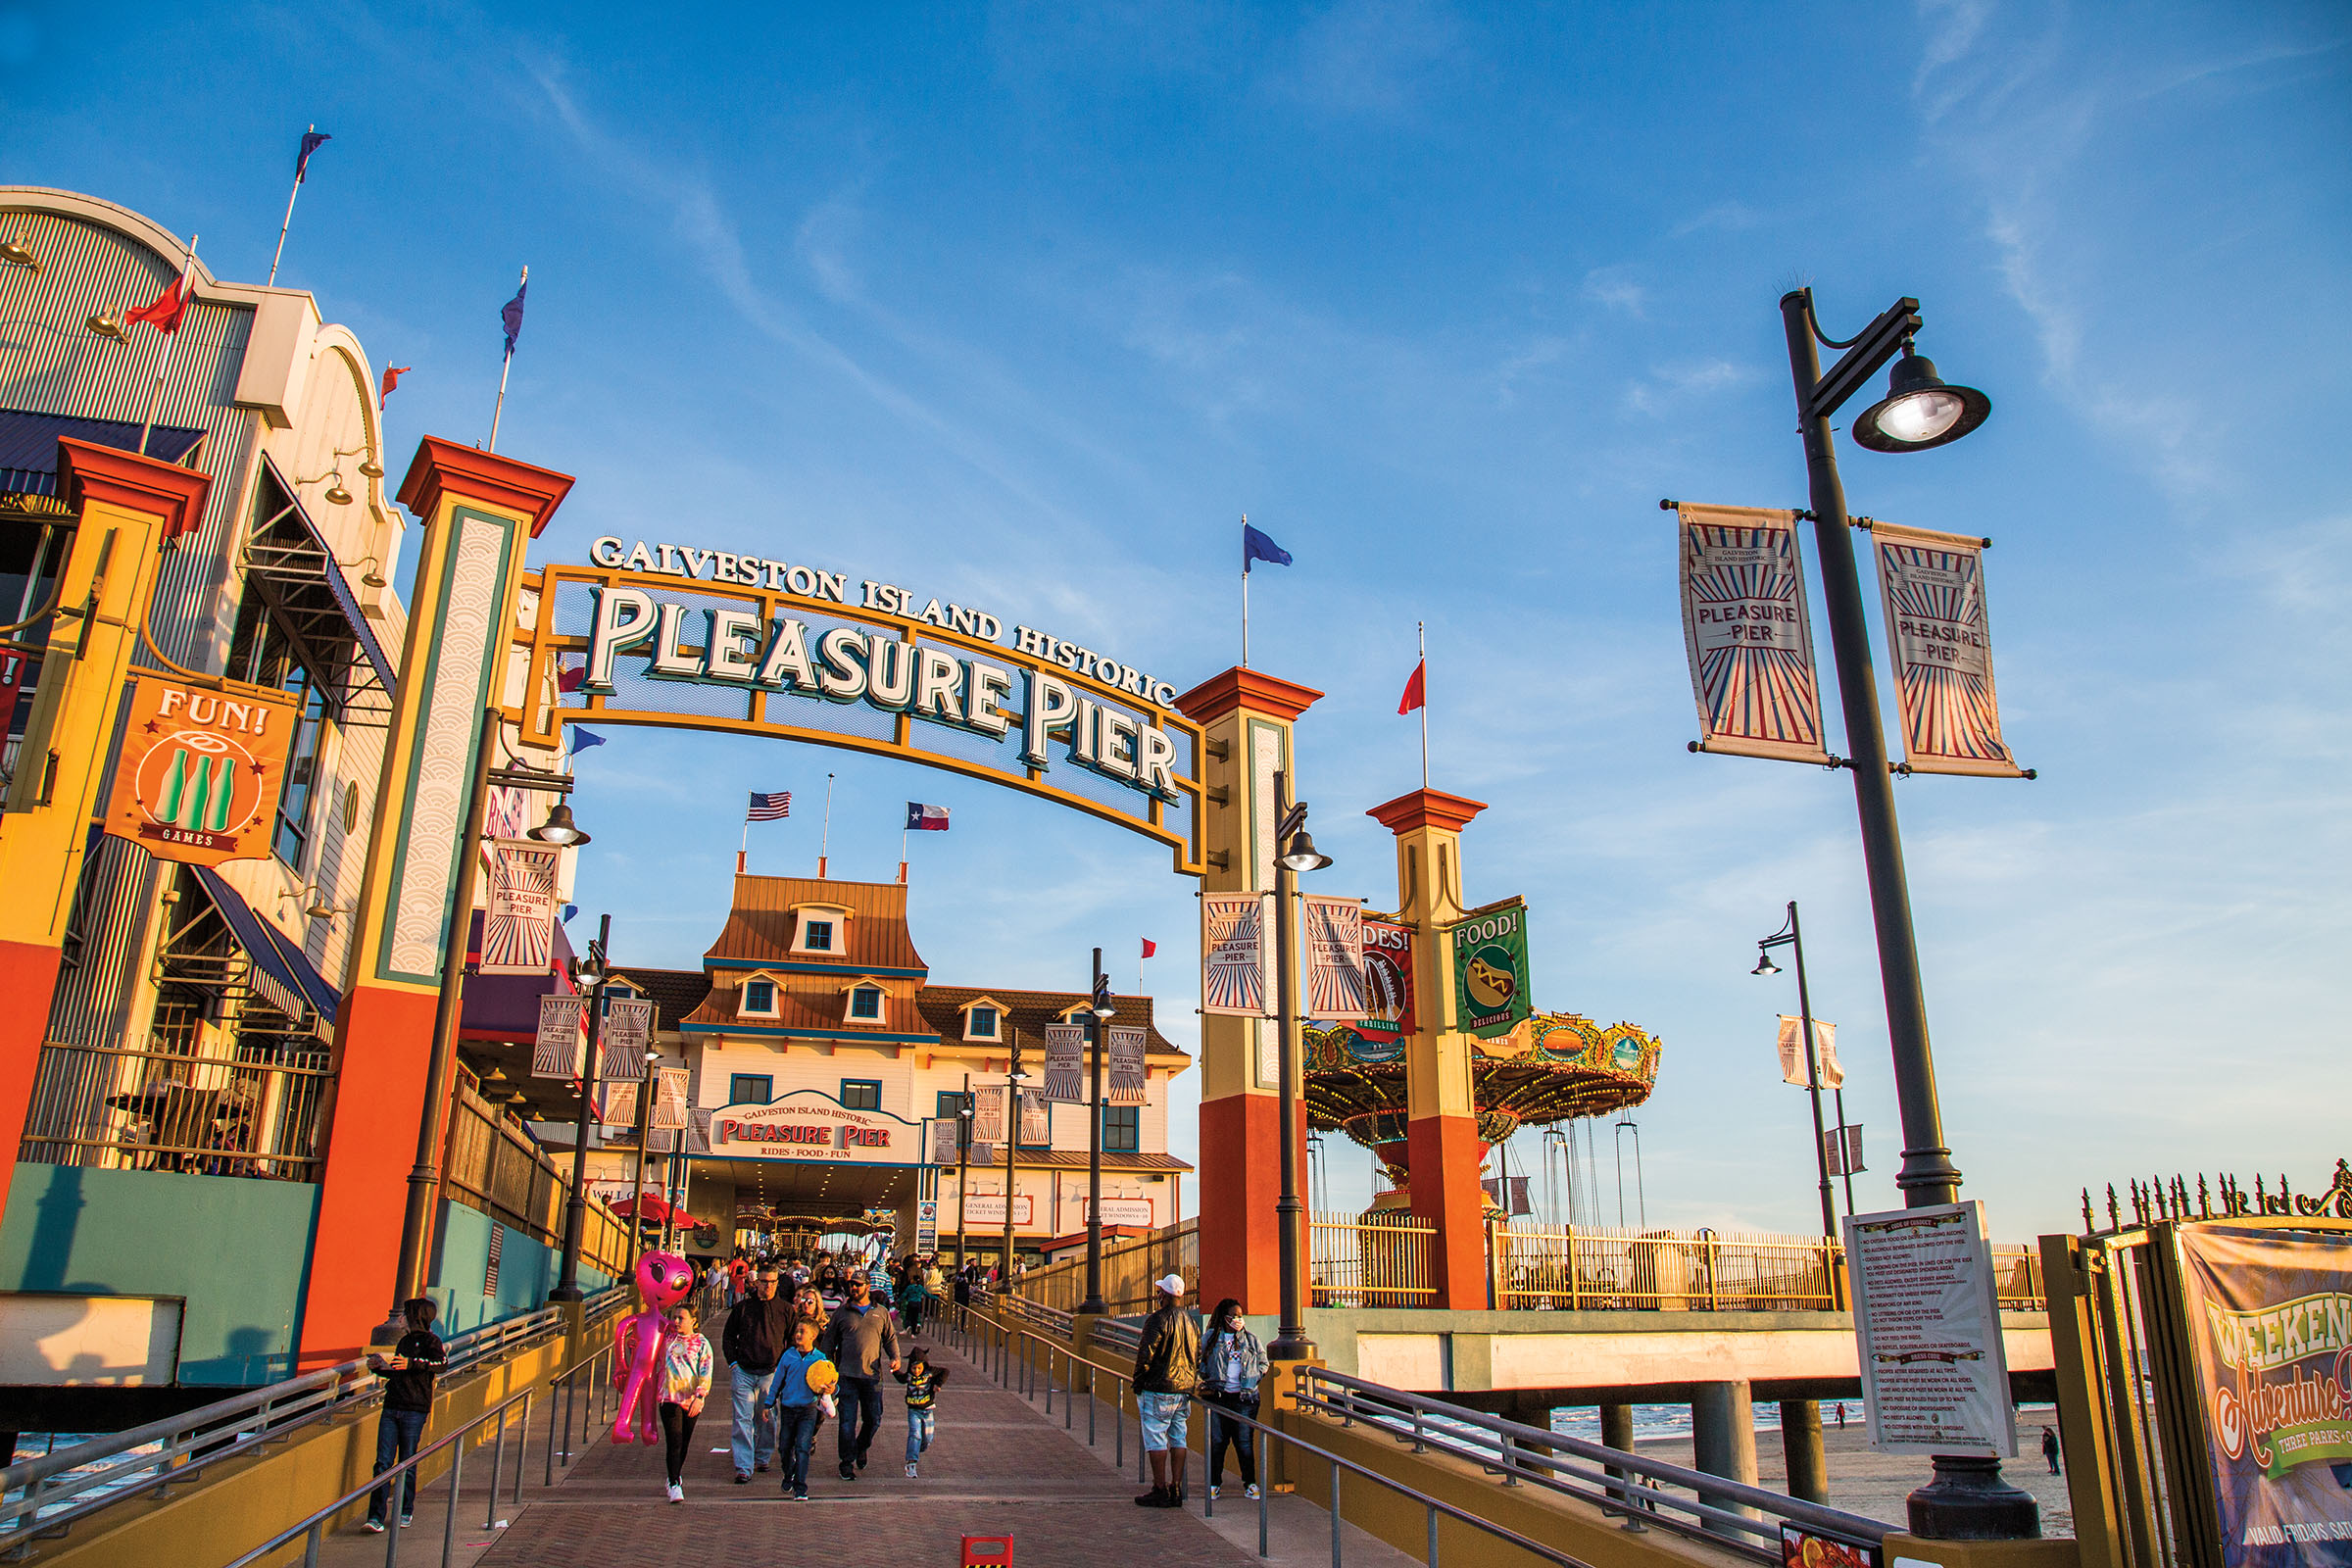 Beautiful blue sky and red and blue flags adorn a walkway with a sign "Galveston Island Historic Pleasure Pier" with people walking underneath